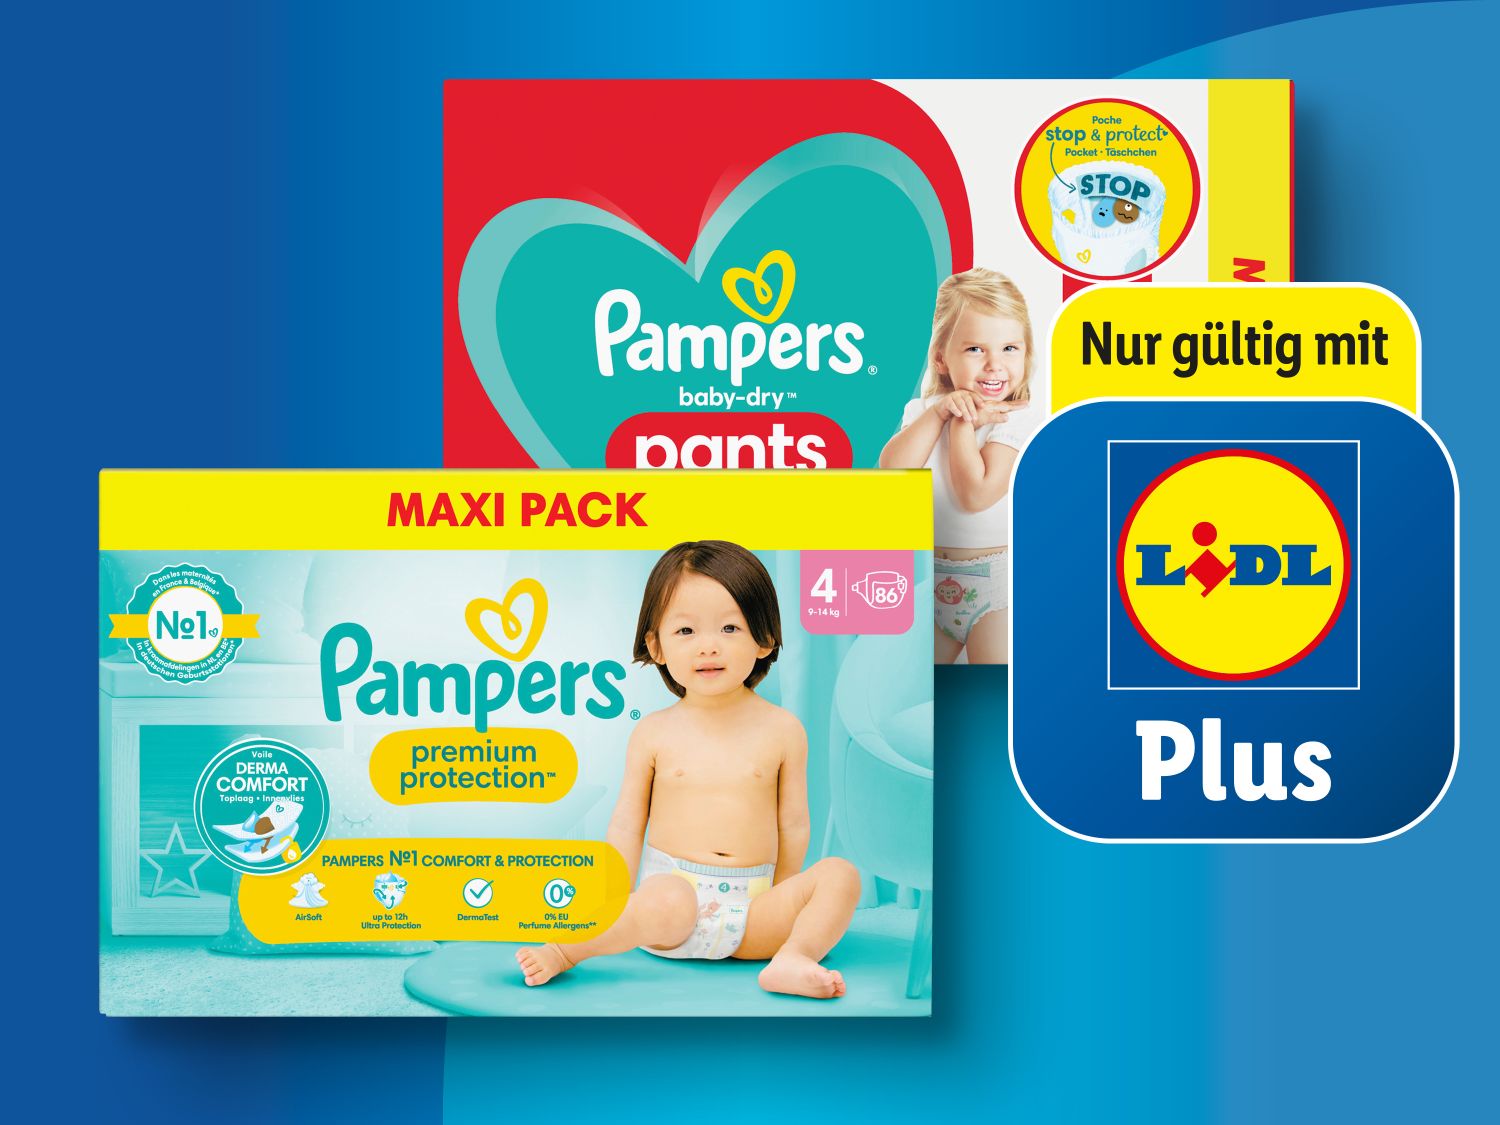 Lidl Pampers - Protection/Baby Premium Dry/Pants